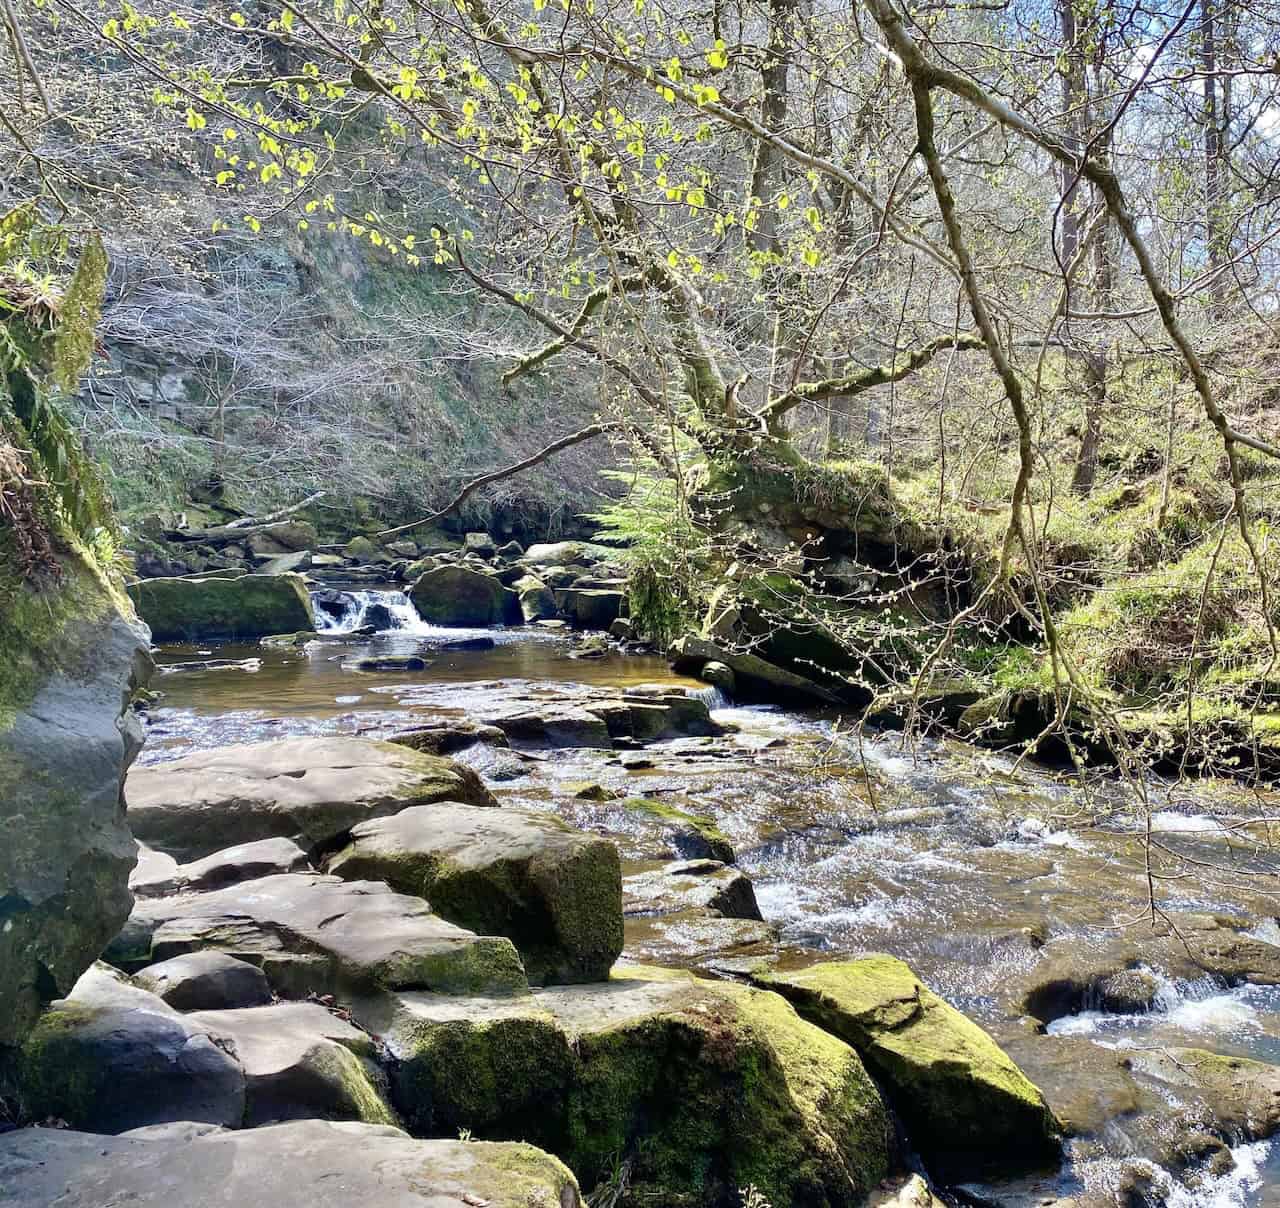 The rocky route alongside West Beck leads to the stunning Mallyan Spout Waterfall. This path adds an adventurous element to any Grosmont walk.